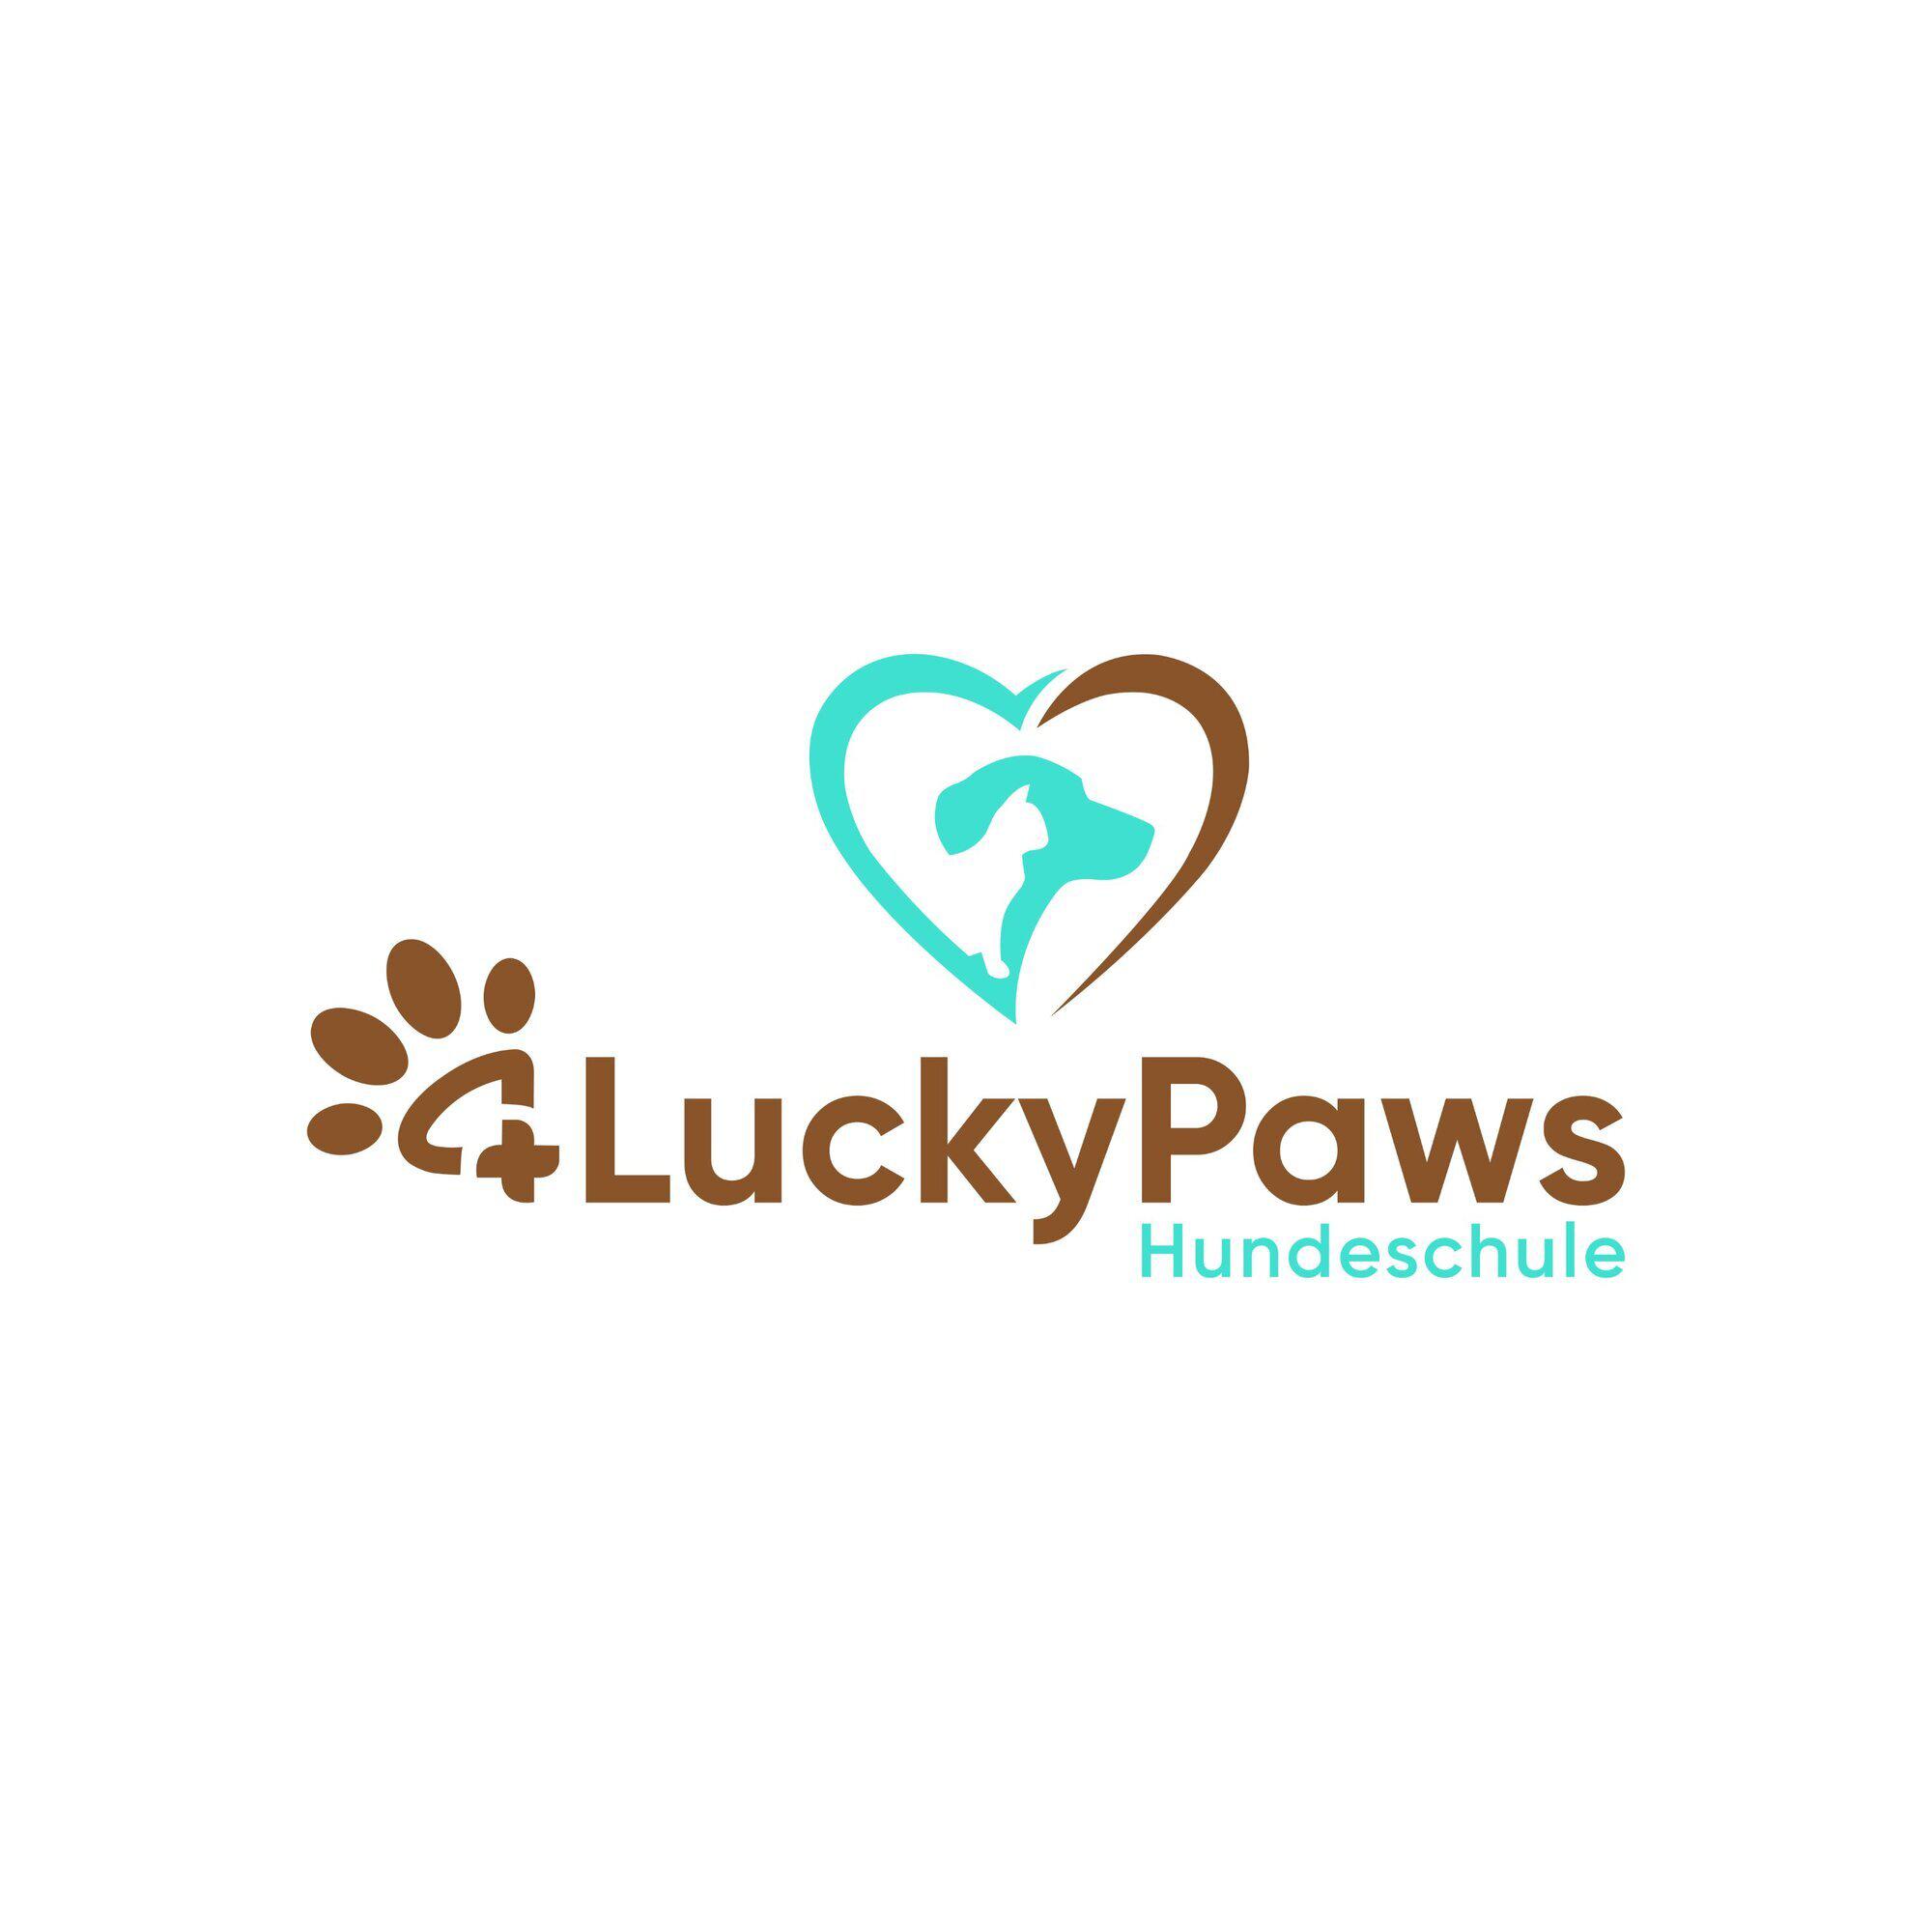 Bild 10 Mobile Hundeschule 4LuckyPaws in Uffing am Staffelsee